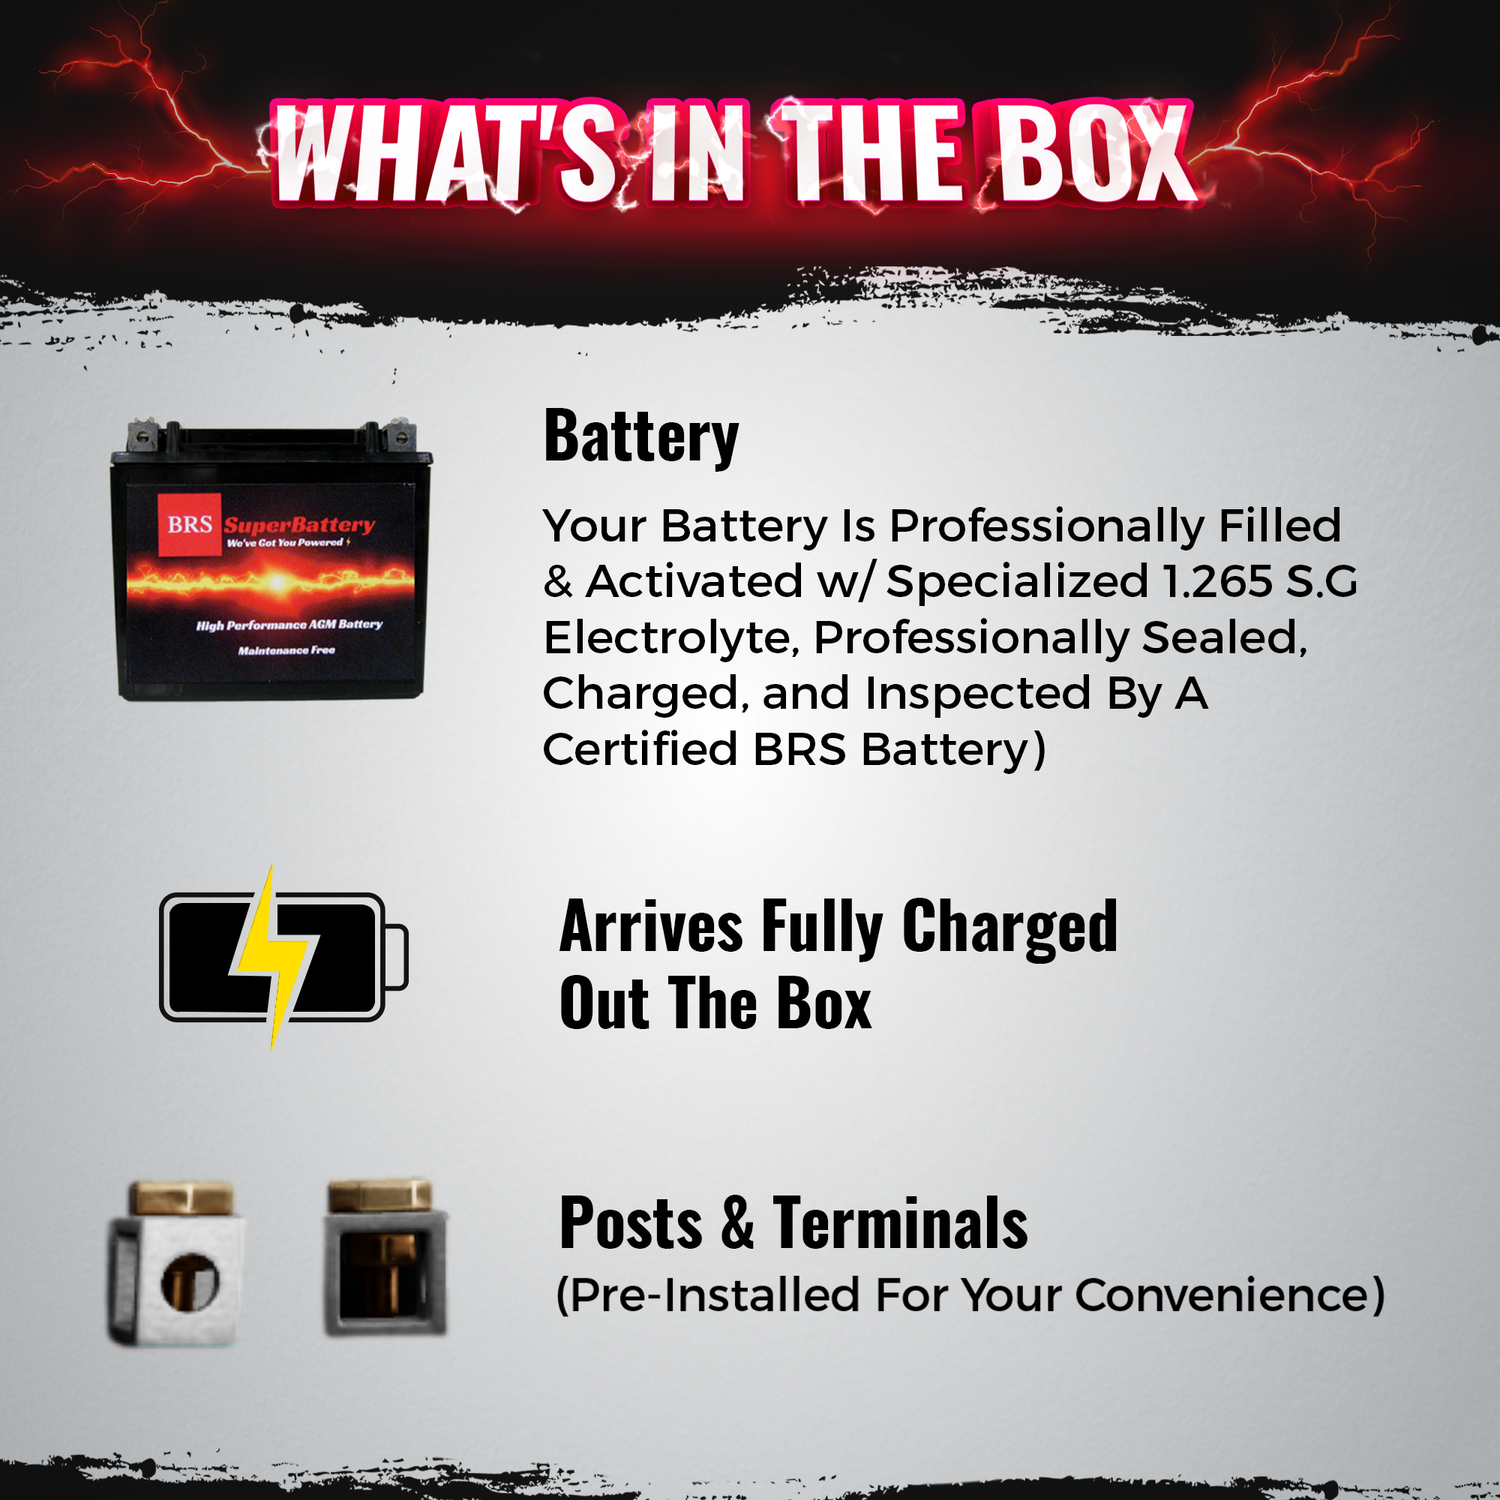 High Performance BRS14-BS 2 Year Battery & Smart Charger / Maintainer Combo Bundle Kit 12v Sealed AGM PowerSports Battery - BRS Super Battery